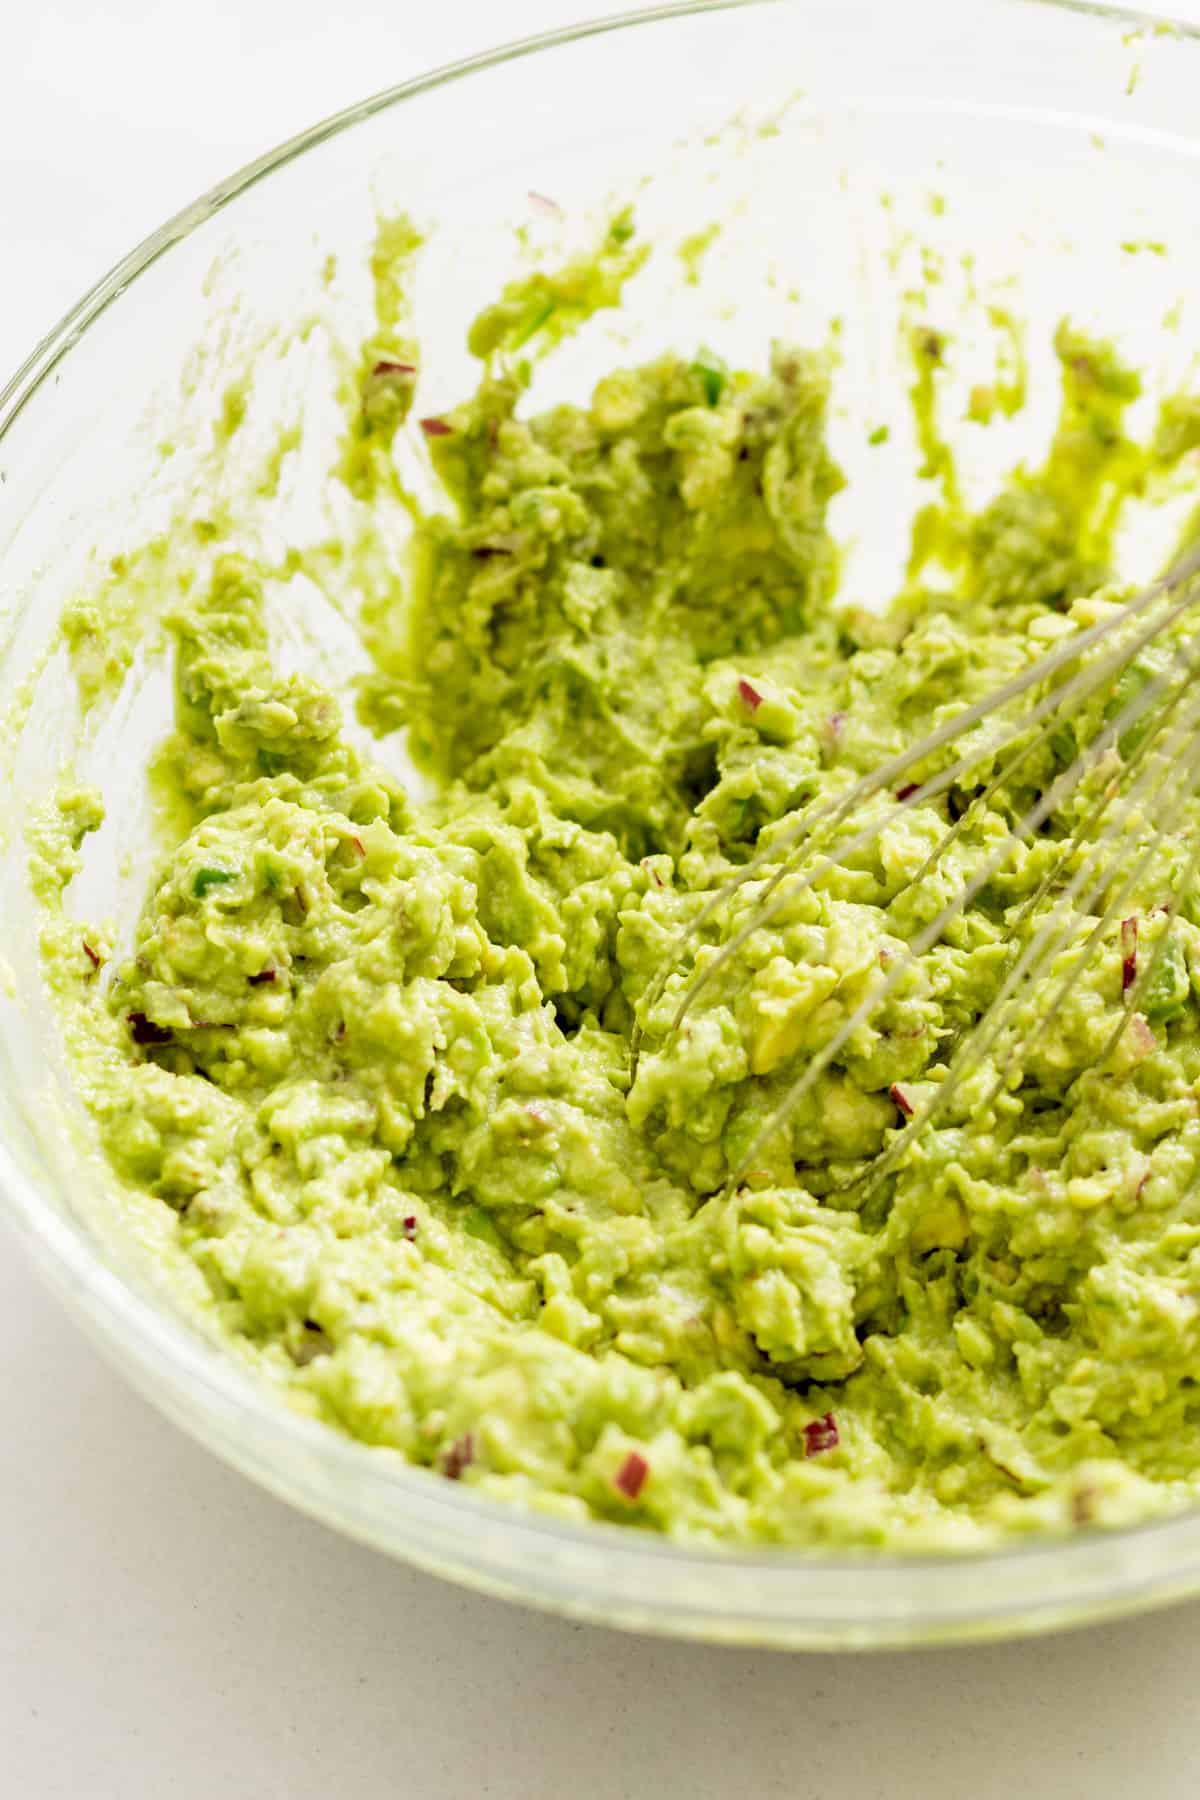 Using a whisk to mash the guacamole.